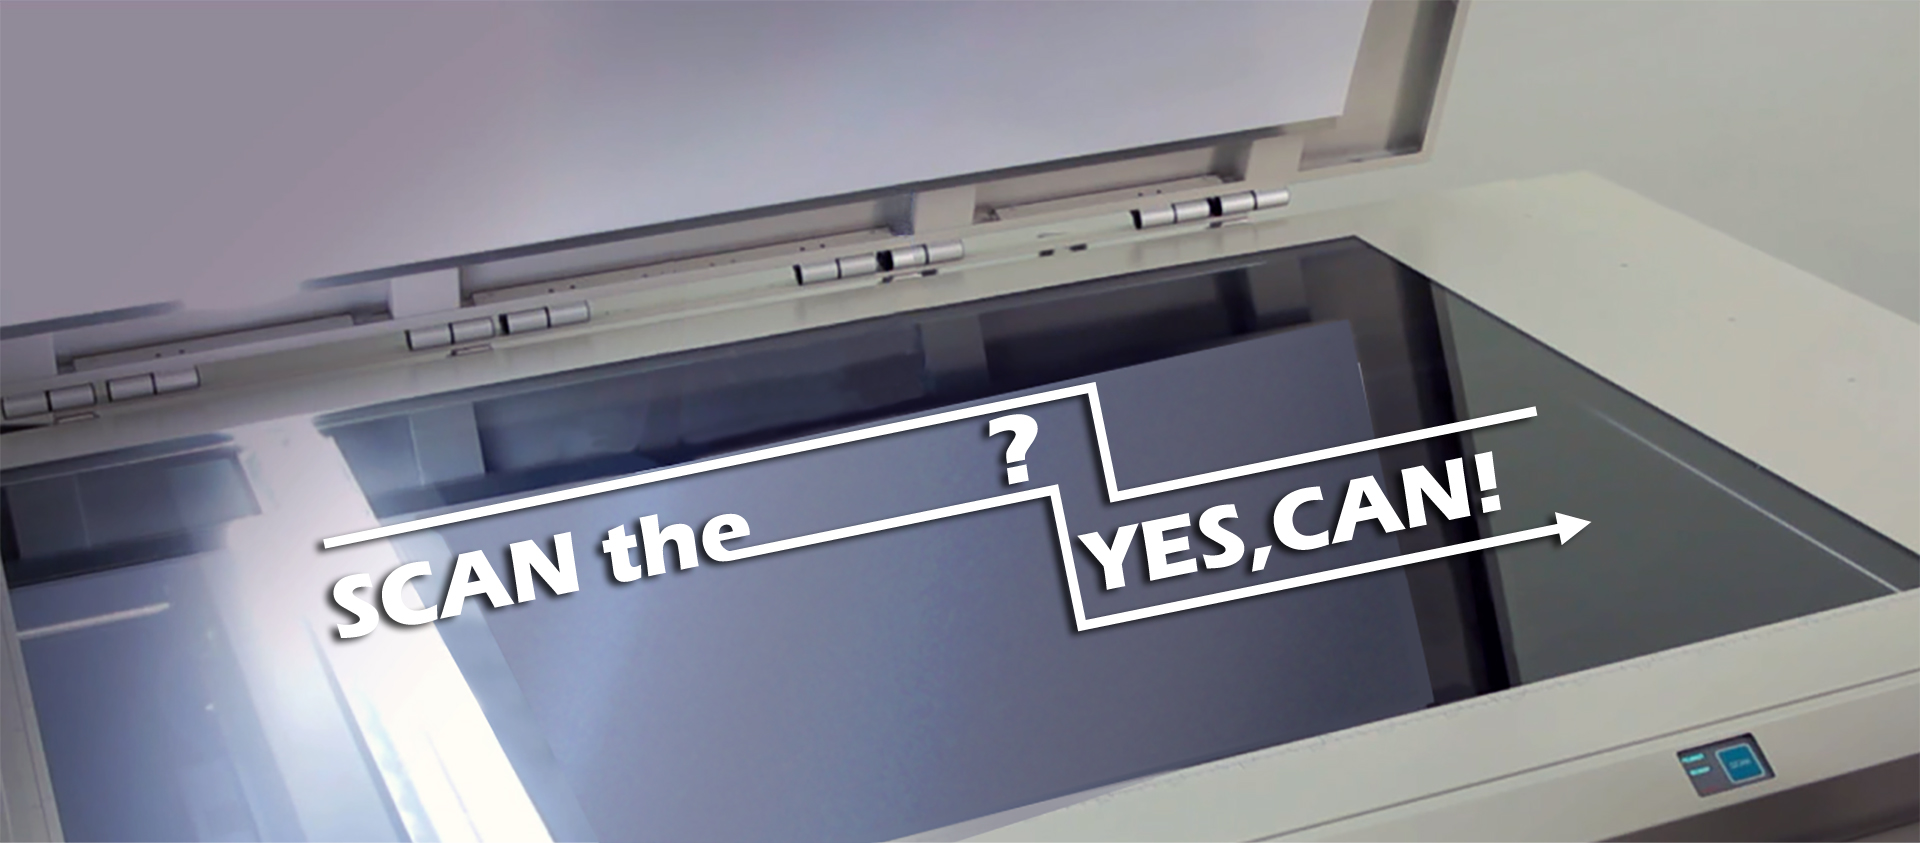 SCAN the? EYS,CAN!